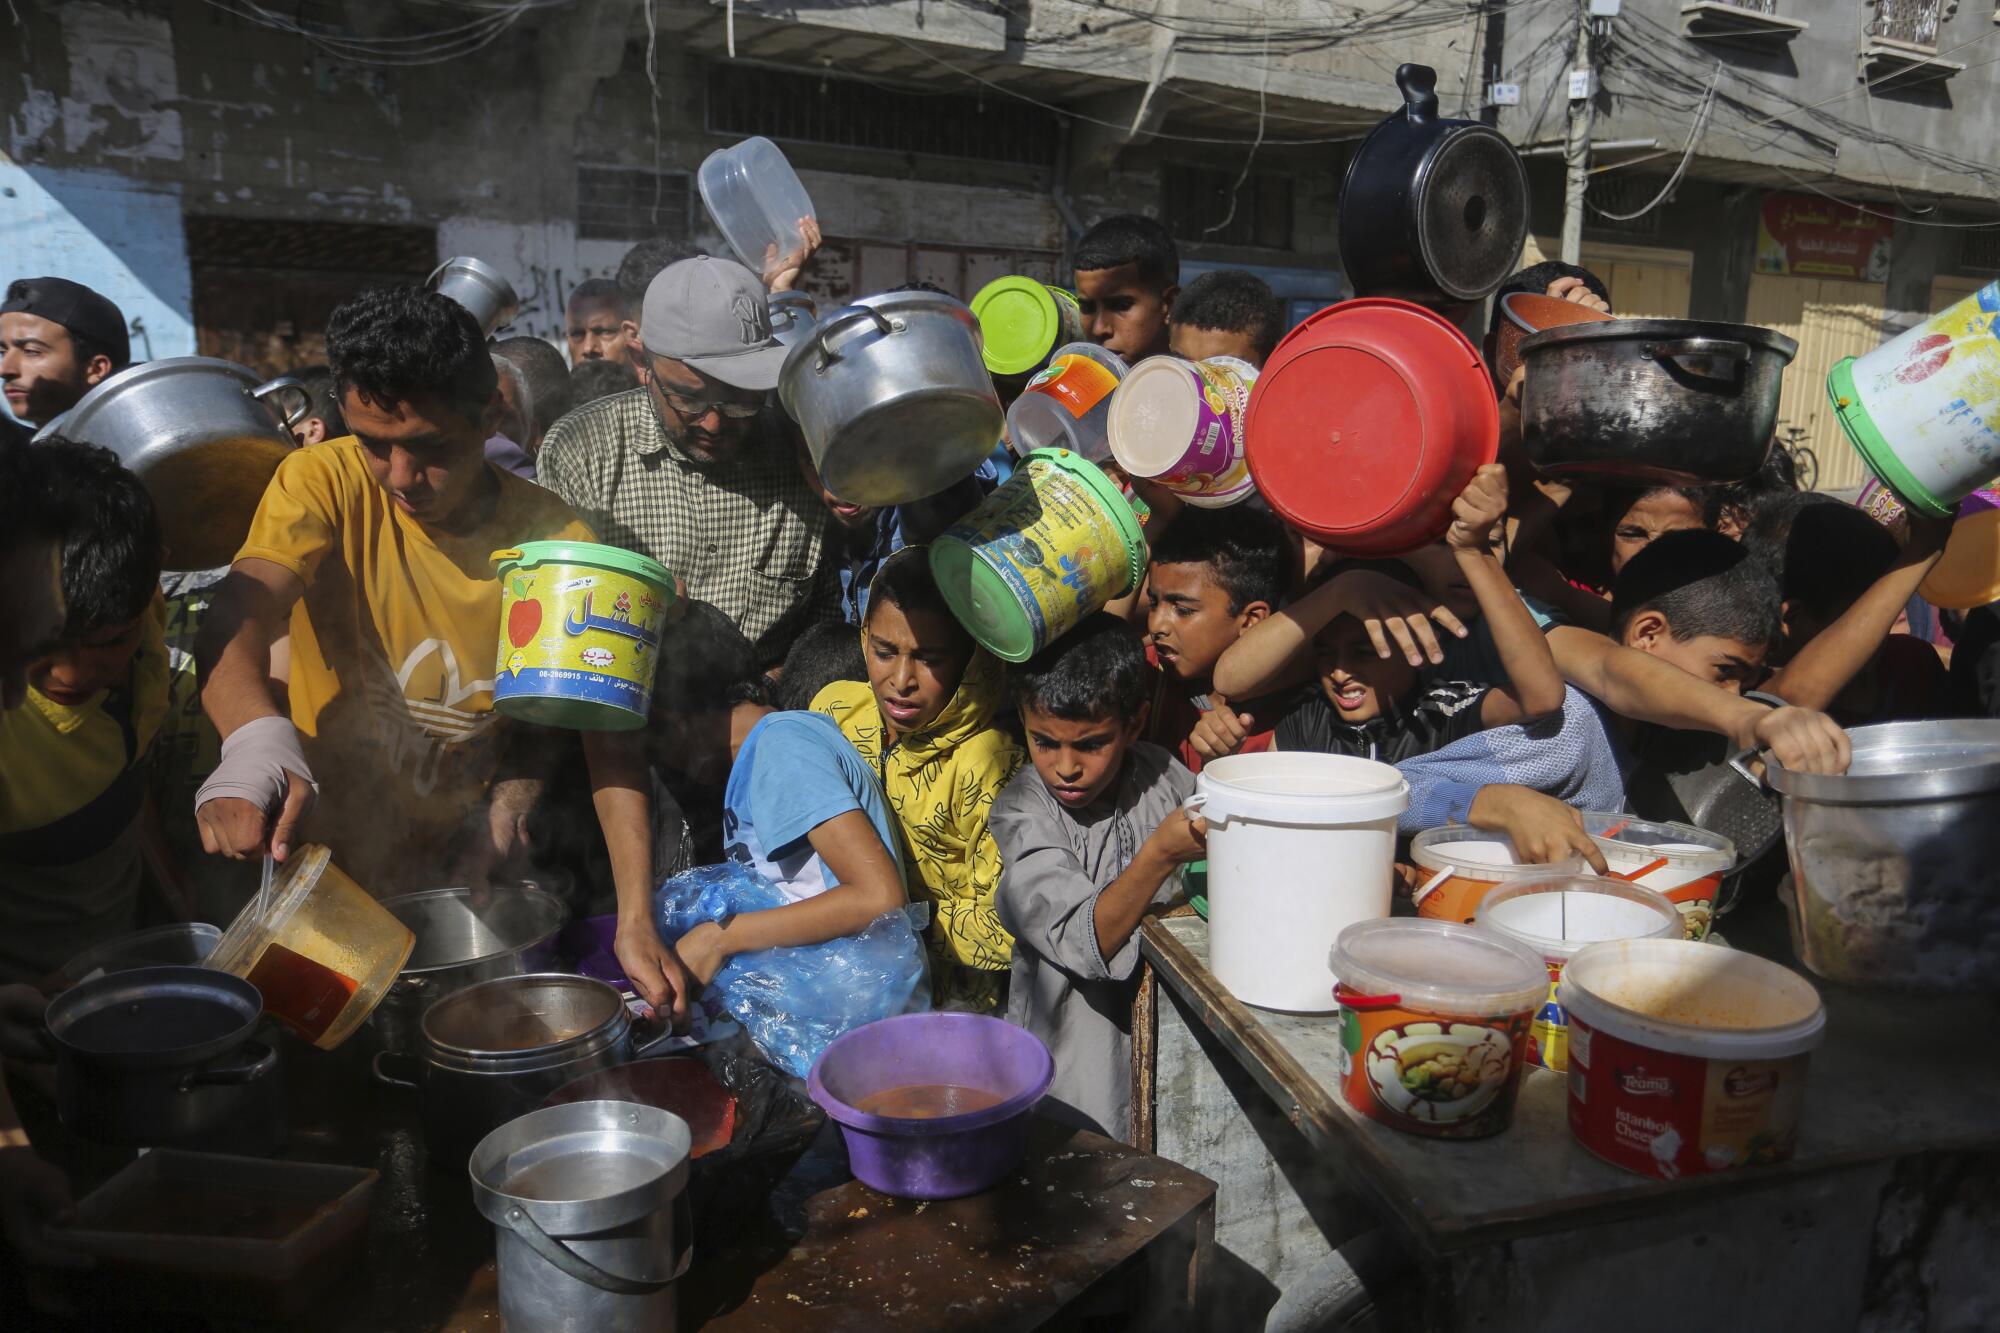 Palestinians crowding together as they wait for food distribution in south Gaza